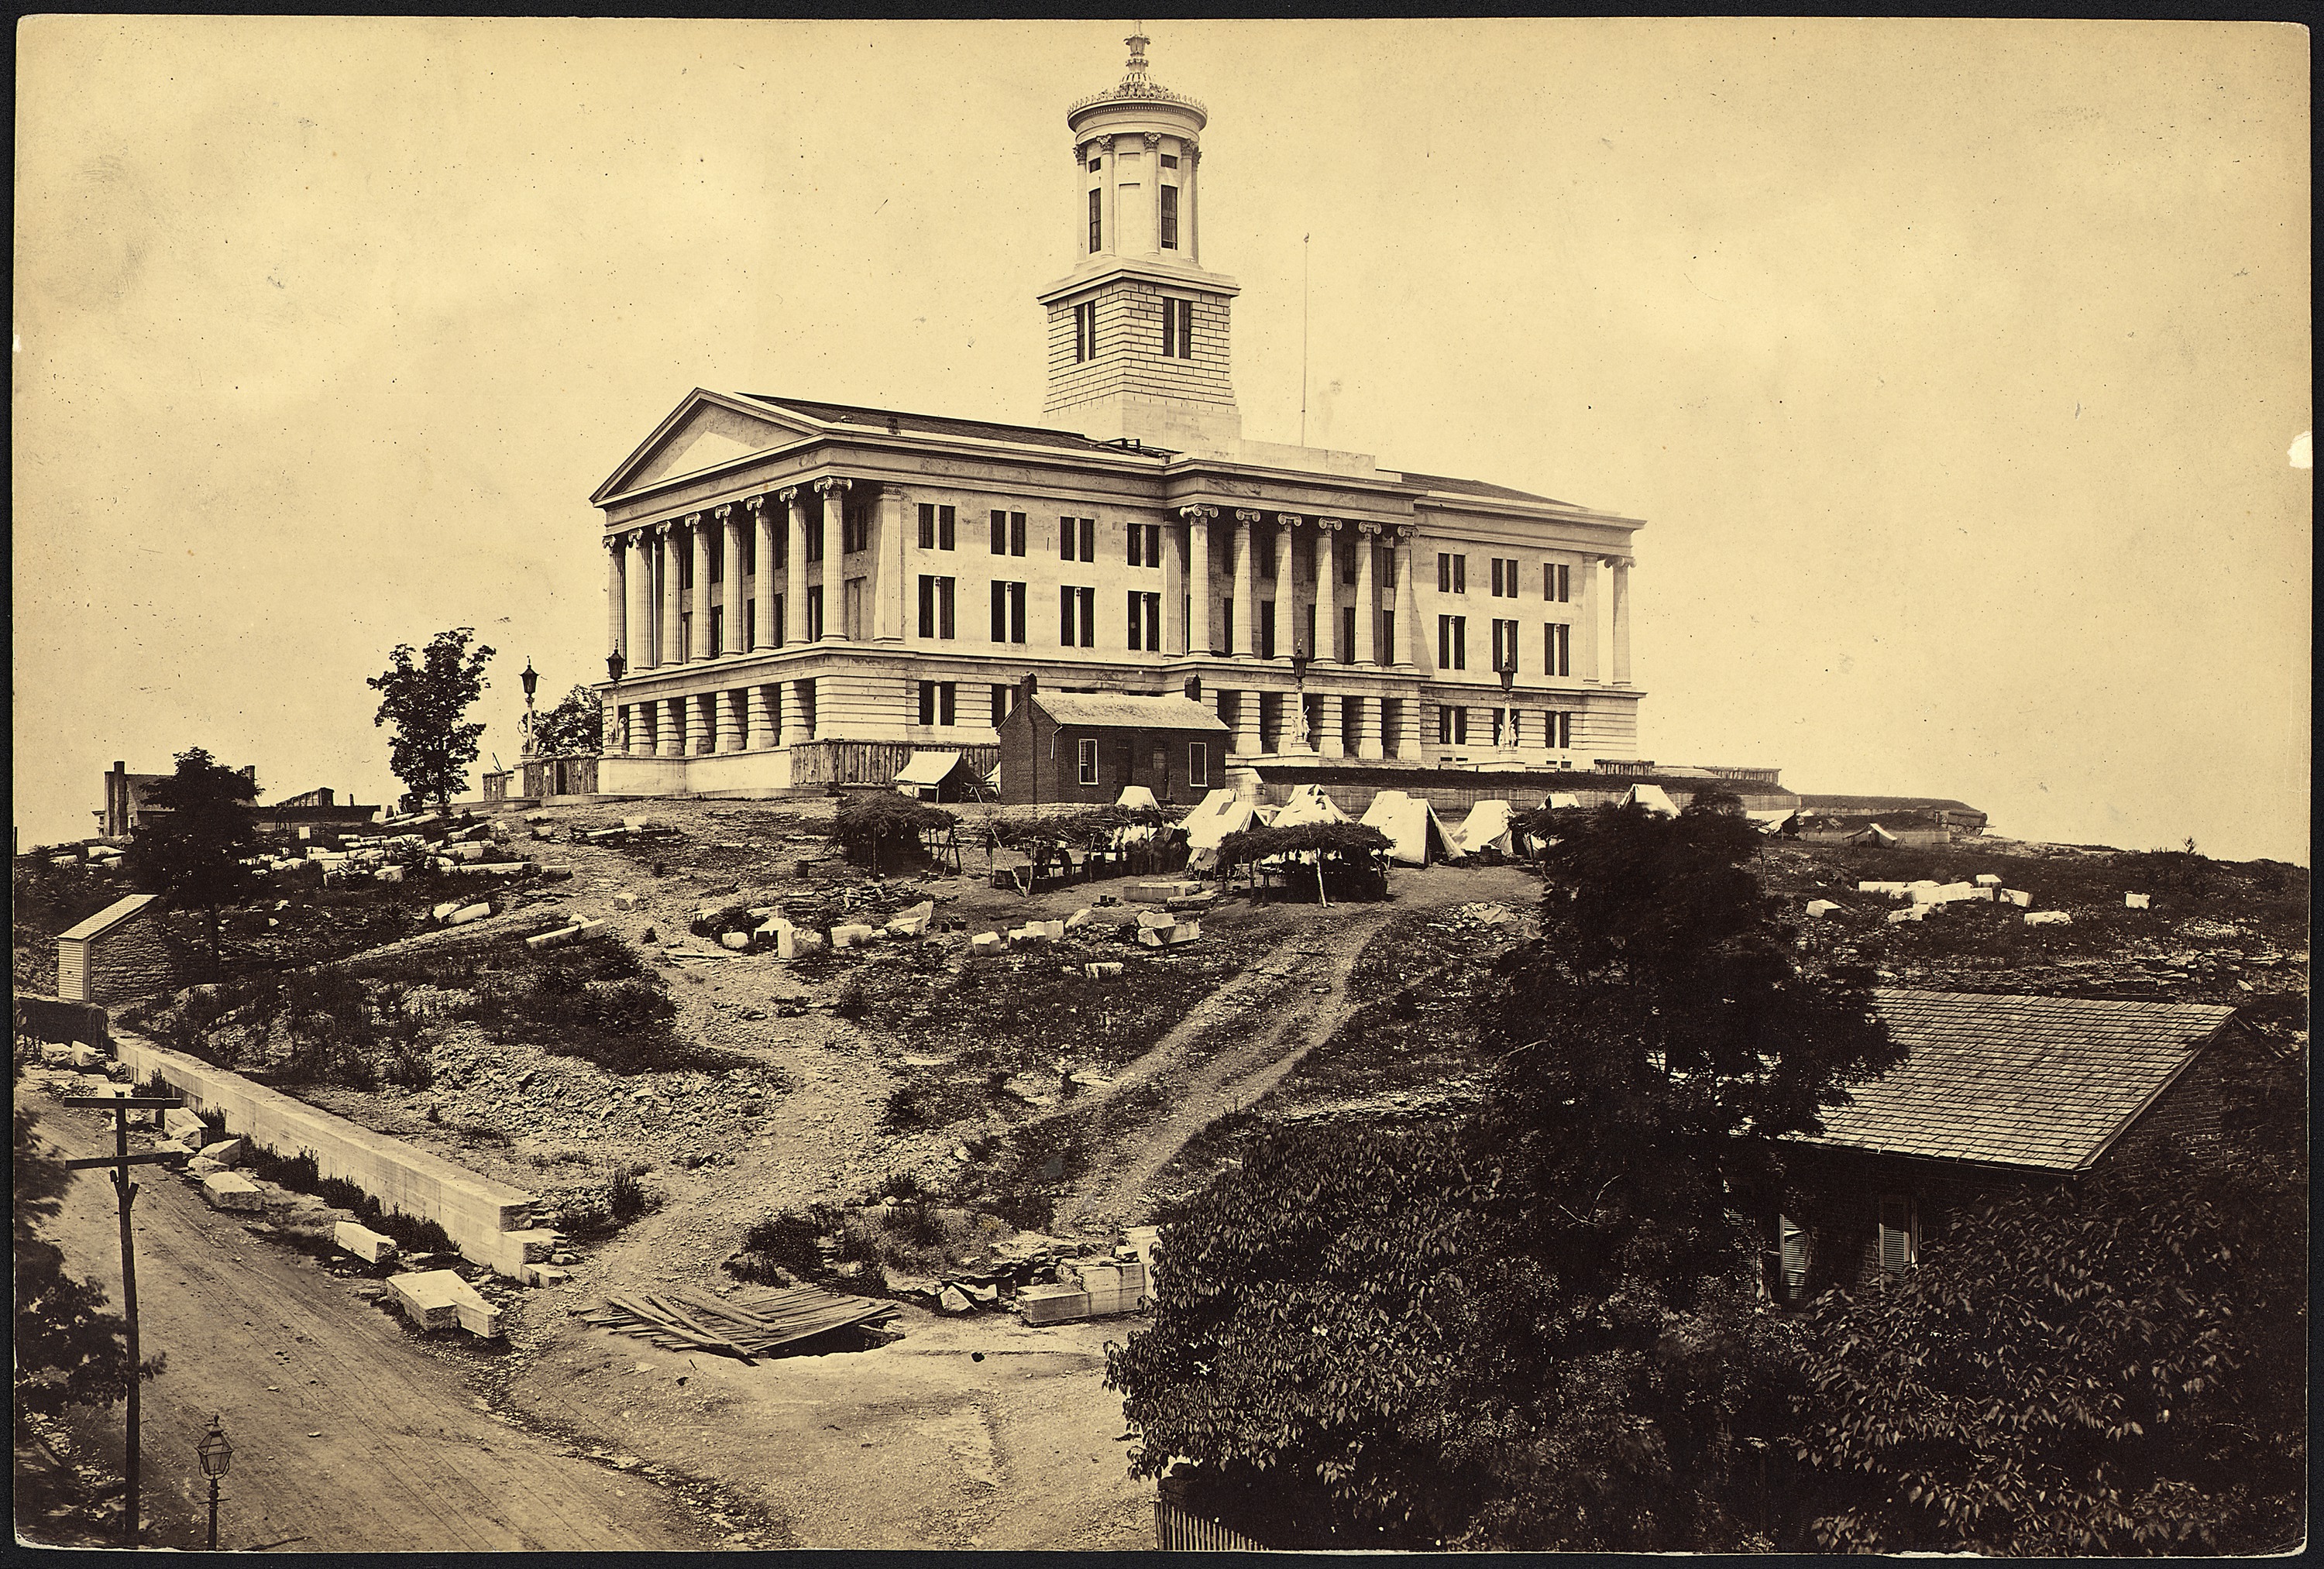 Tennessee, Nashville, the State Capitol - NARA - 533375